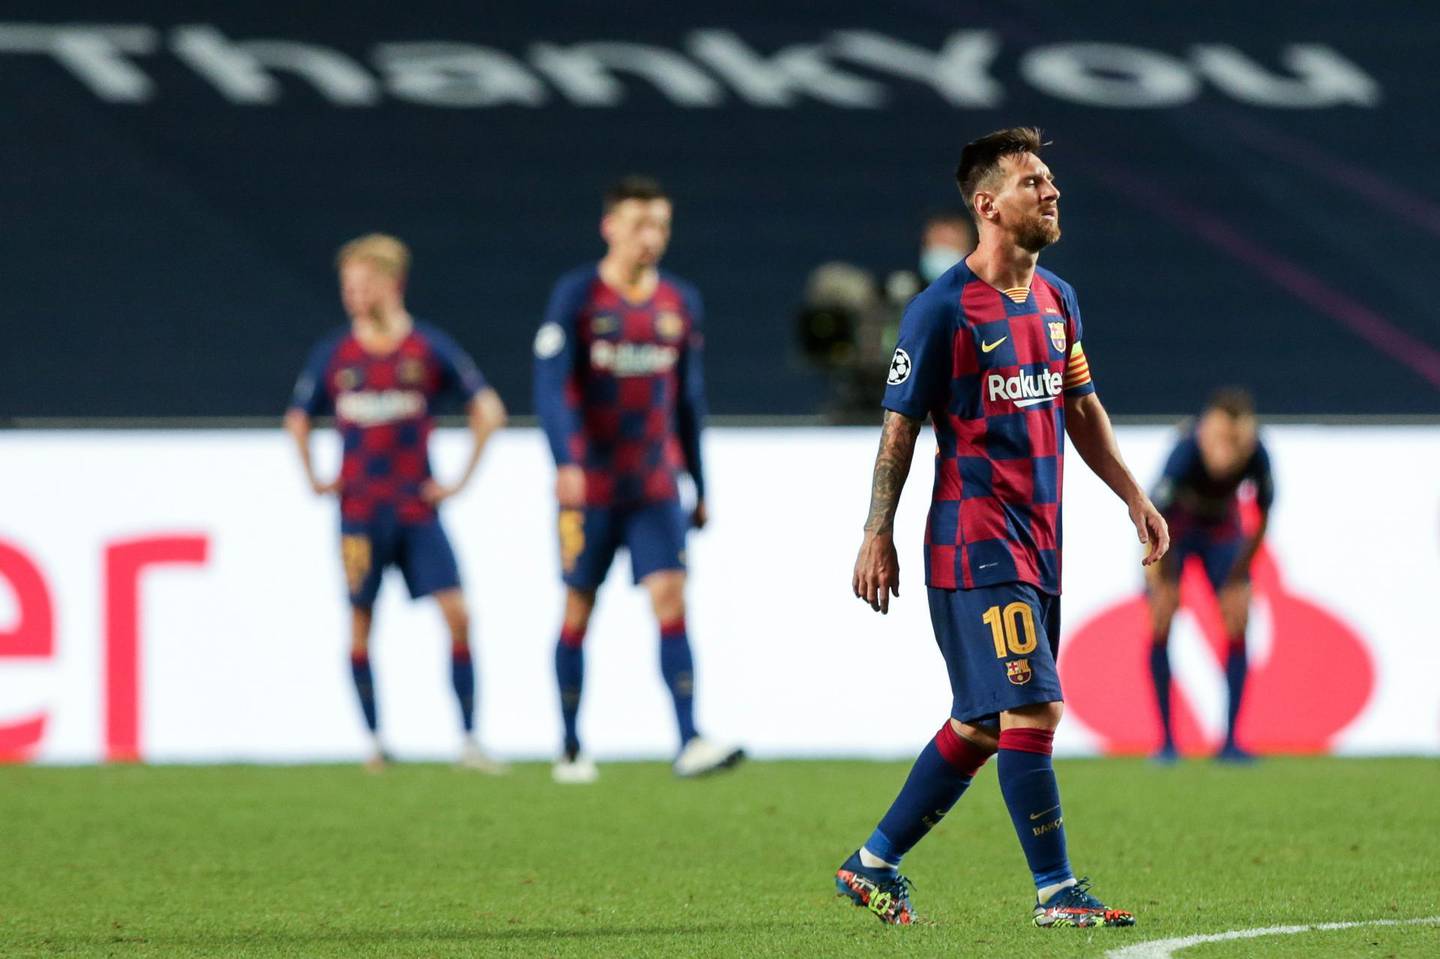 epa08604466 FC Barcelona's Lionel Messi shows his dejection at the end of the UEFA Champions League quarter final soccer match FC Barcelona vs Bayern Munich held at Luz Stadium in Lisbon, Portugal, 14 August 2020.  EPA/TIAGO PETINGA